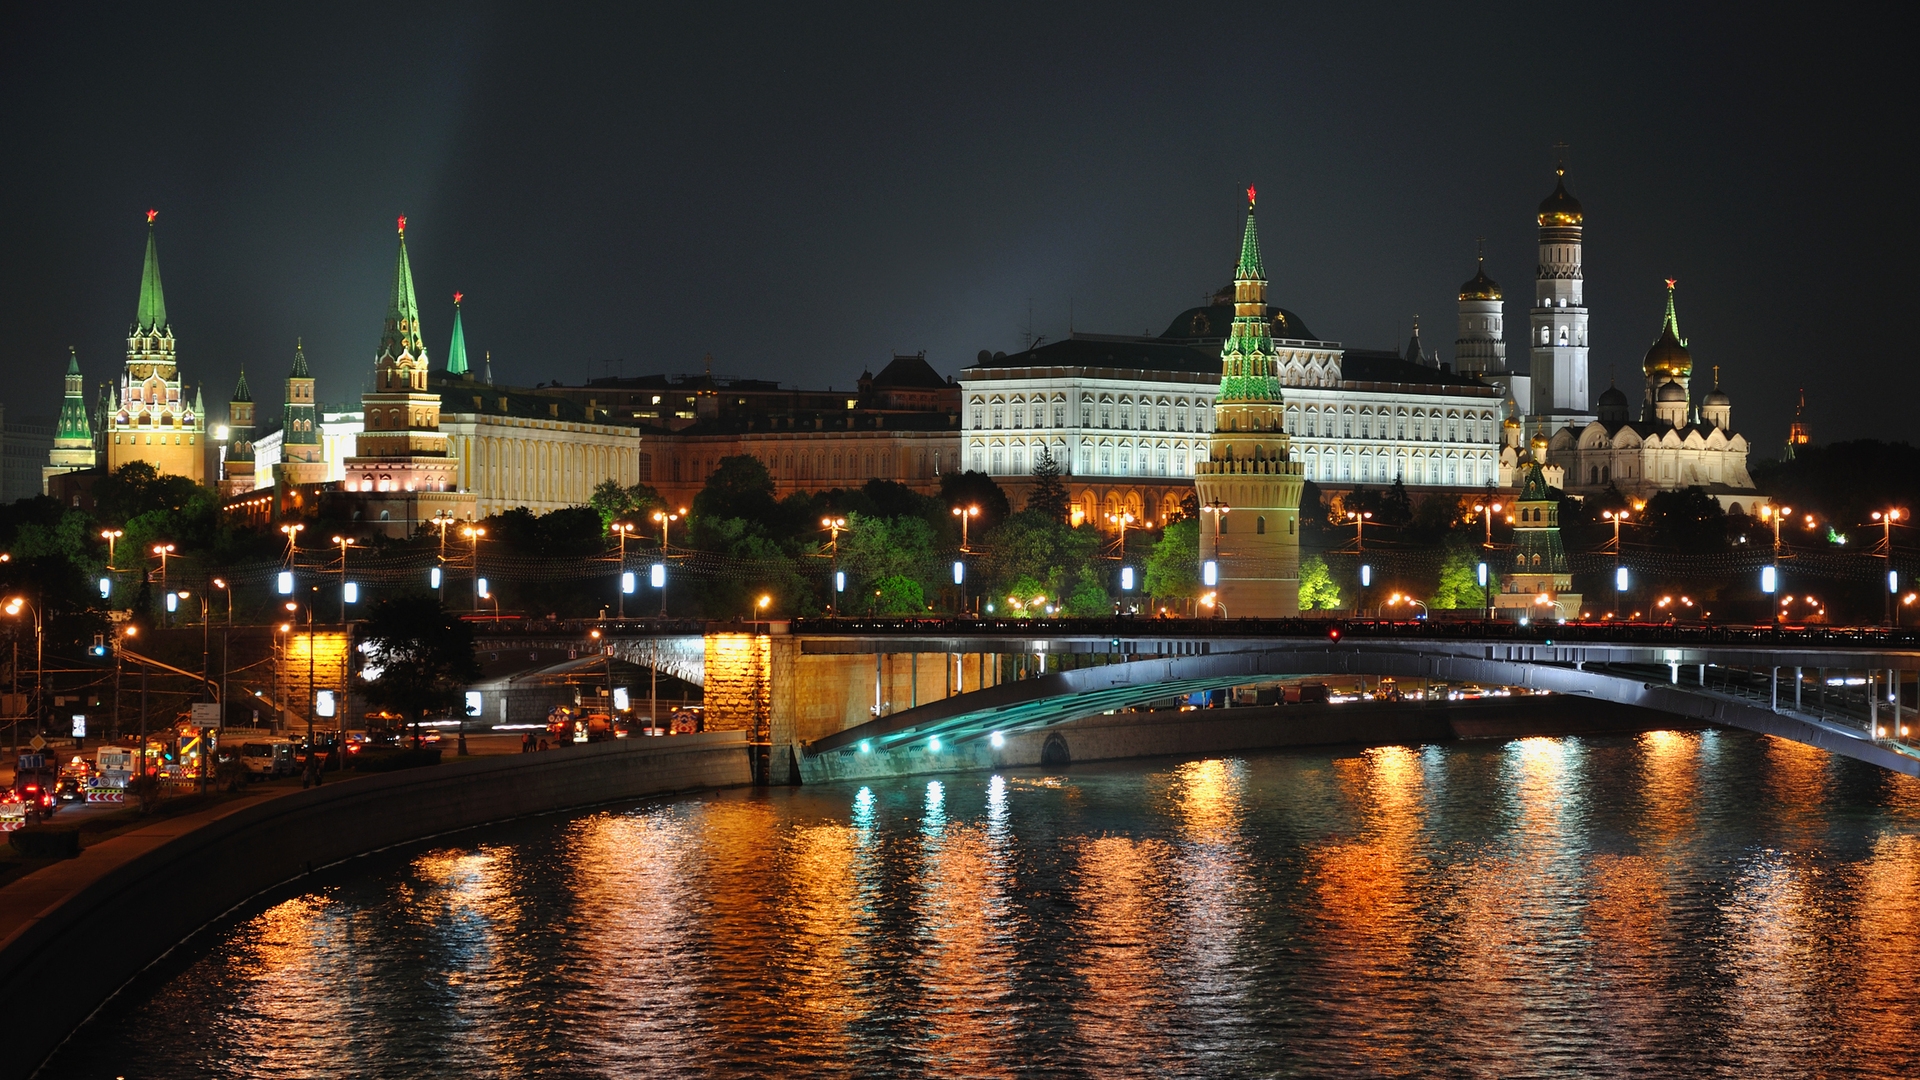 Moscow Night Lights for 1920 x 1080 HDTV 1080p resolution